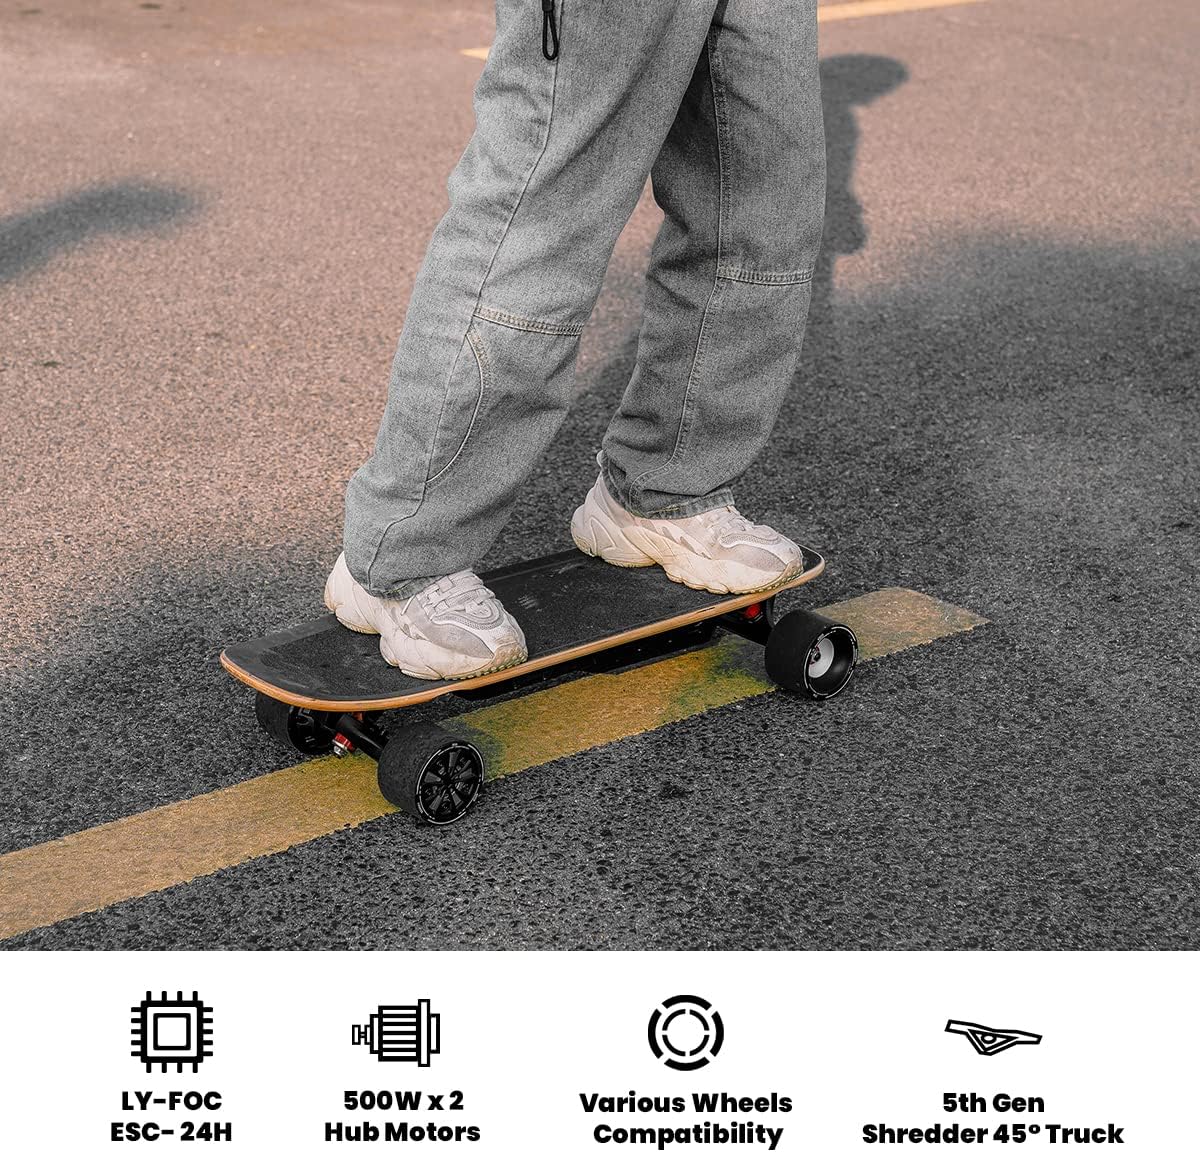 Unleashing Fun and Speed with MEEPO Mini5 Electric Skateboard: A Comprehensive Review